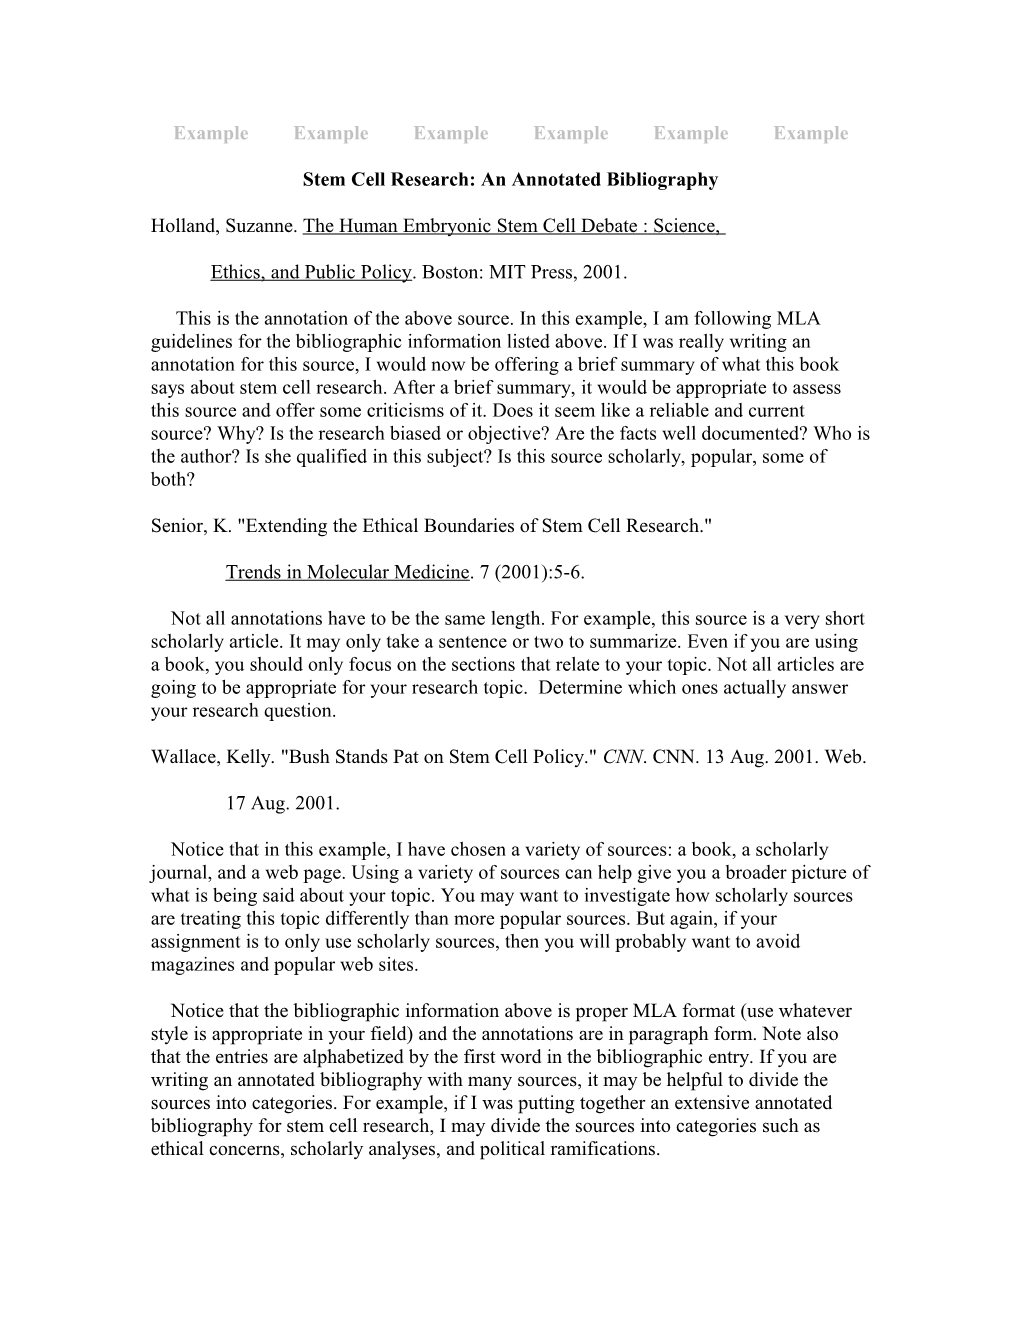 Stem Cell Research: an Annotated Bibliography